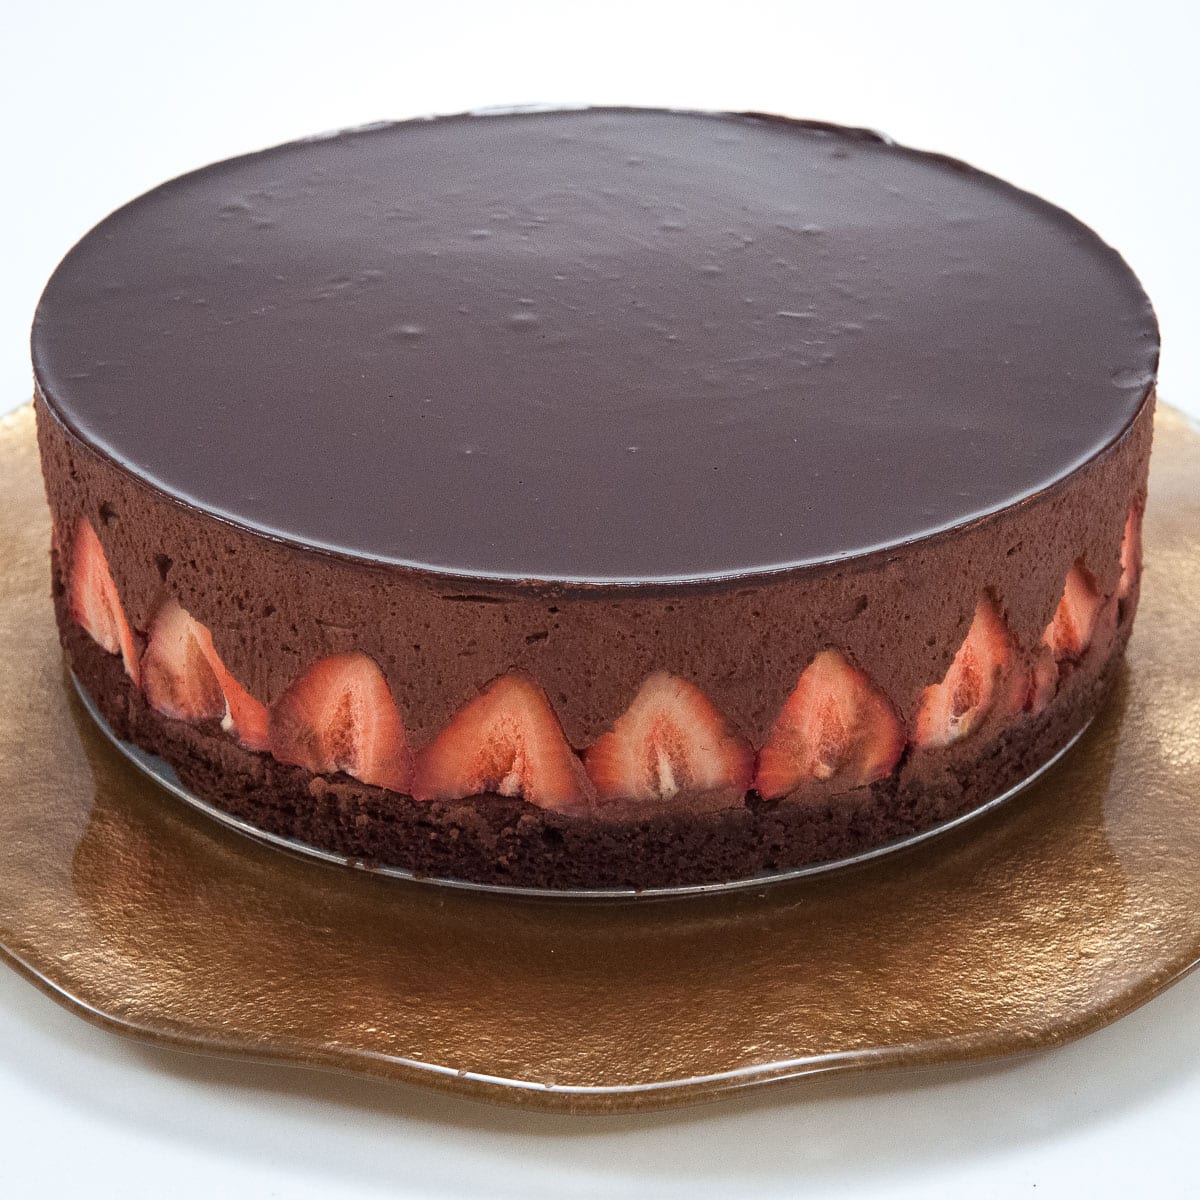 Chocolate Strawberry Mousse Torte on a golden plate.